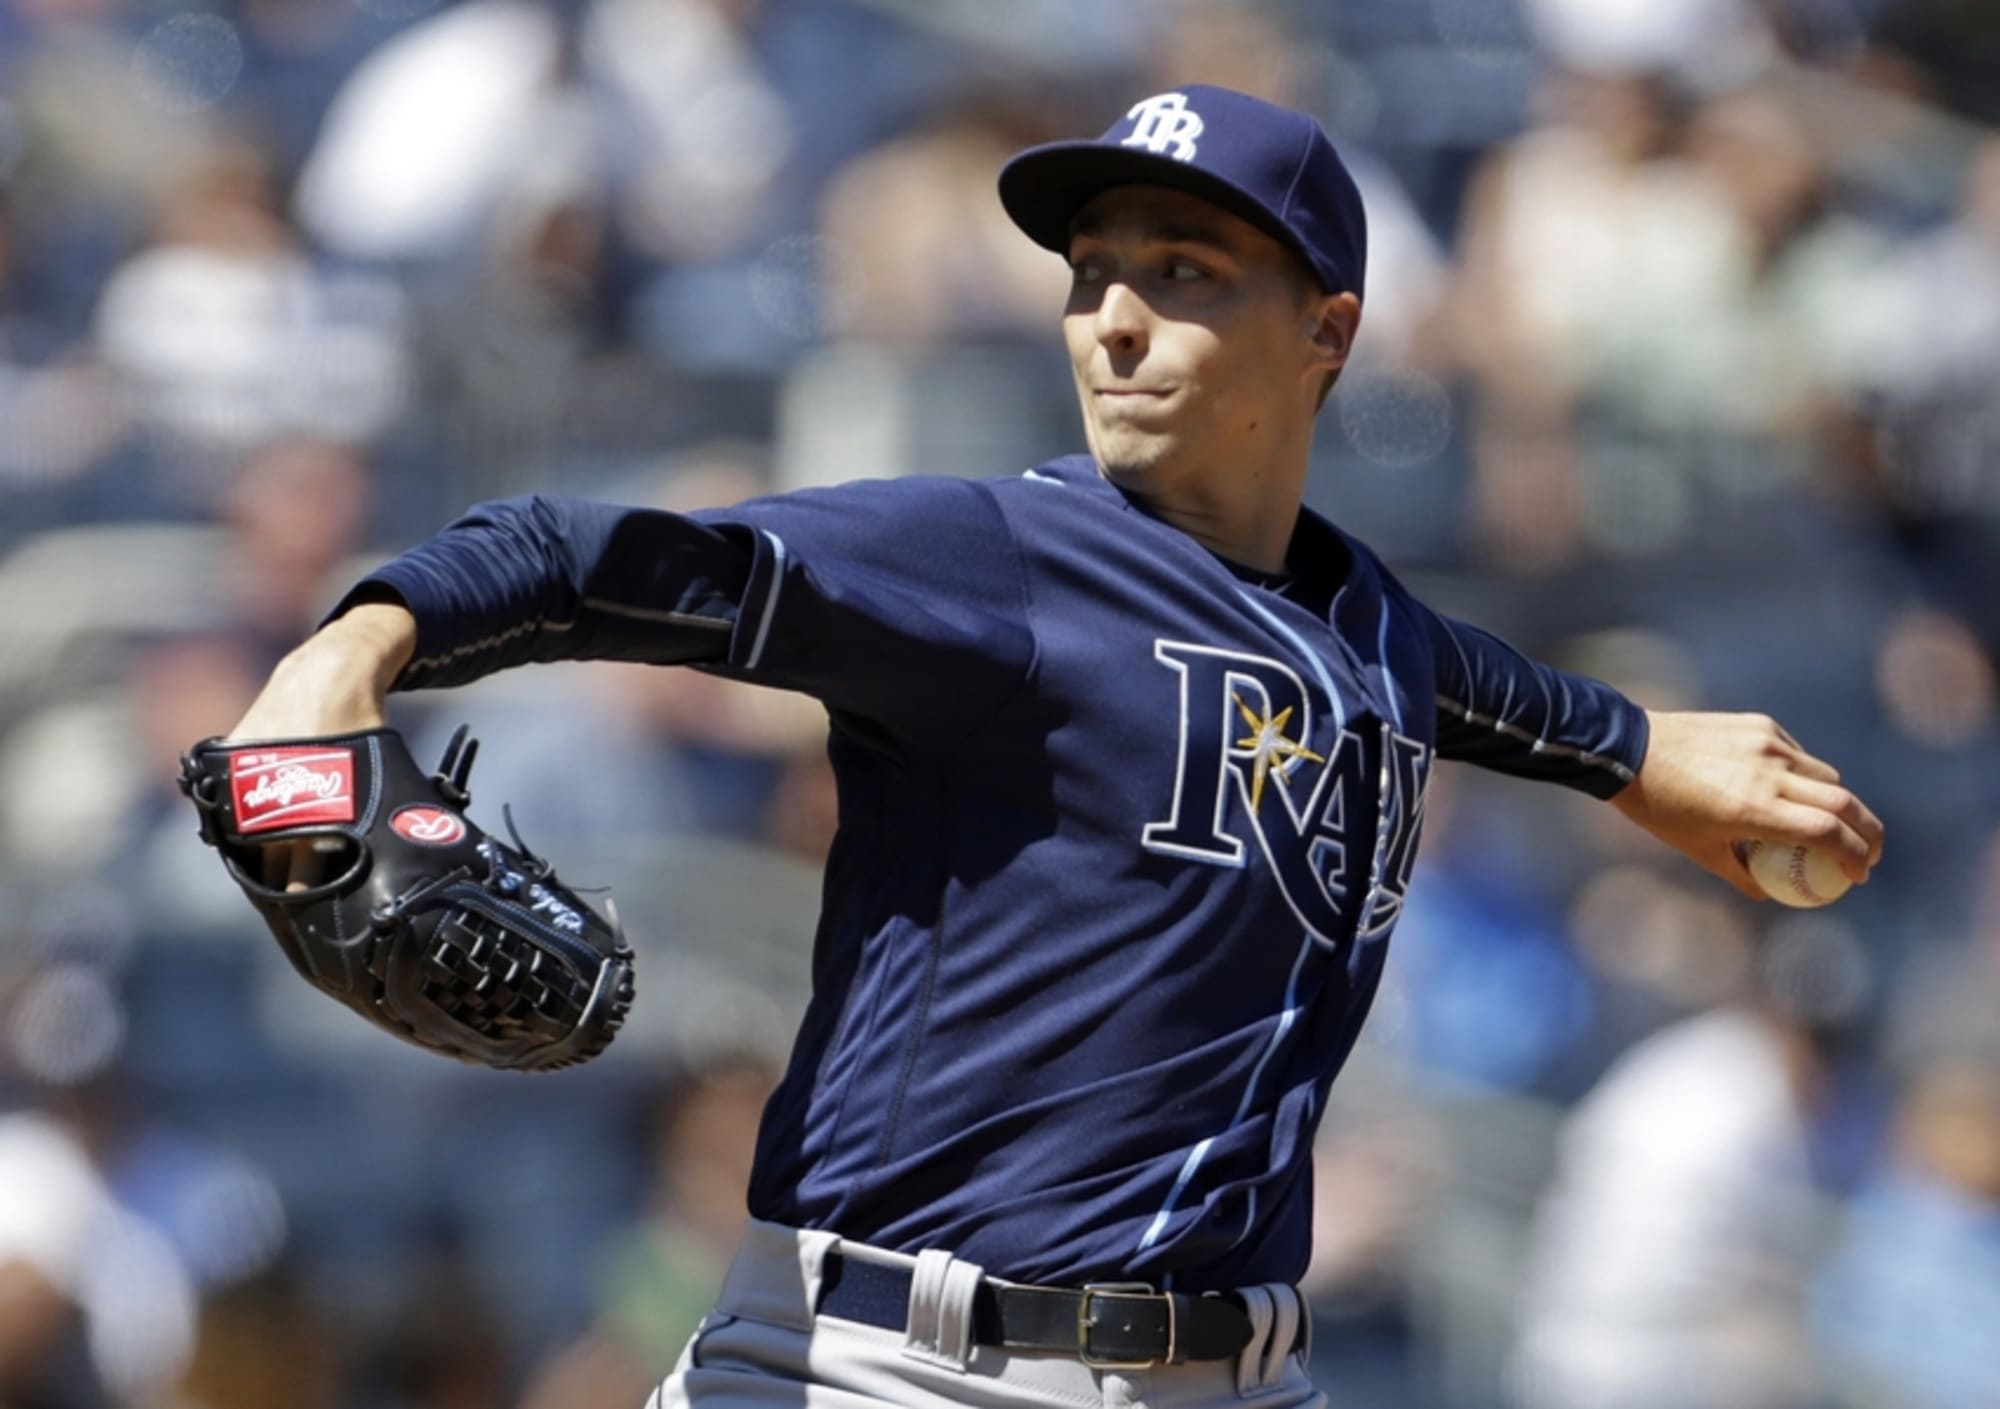 Blake Snell. Chris Snelling. Player of the year